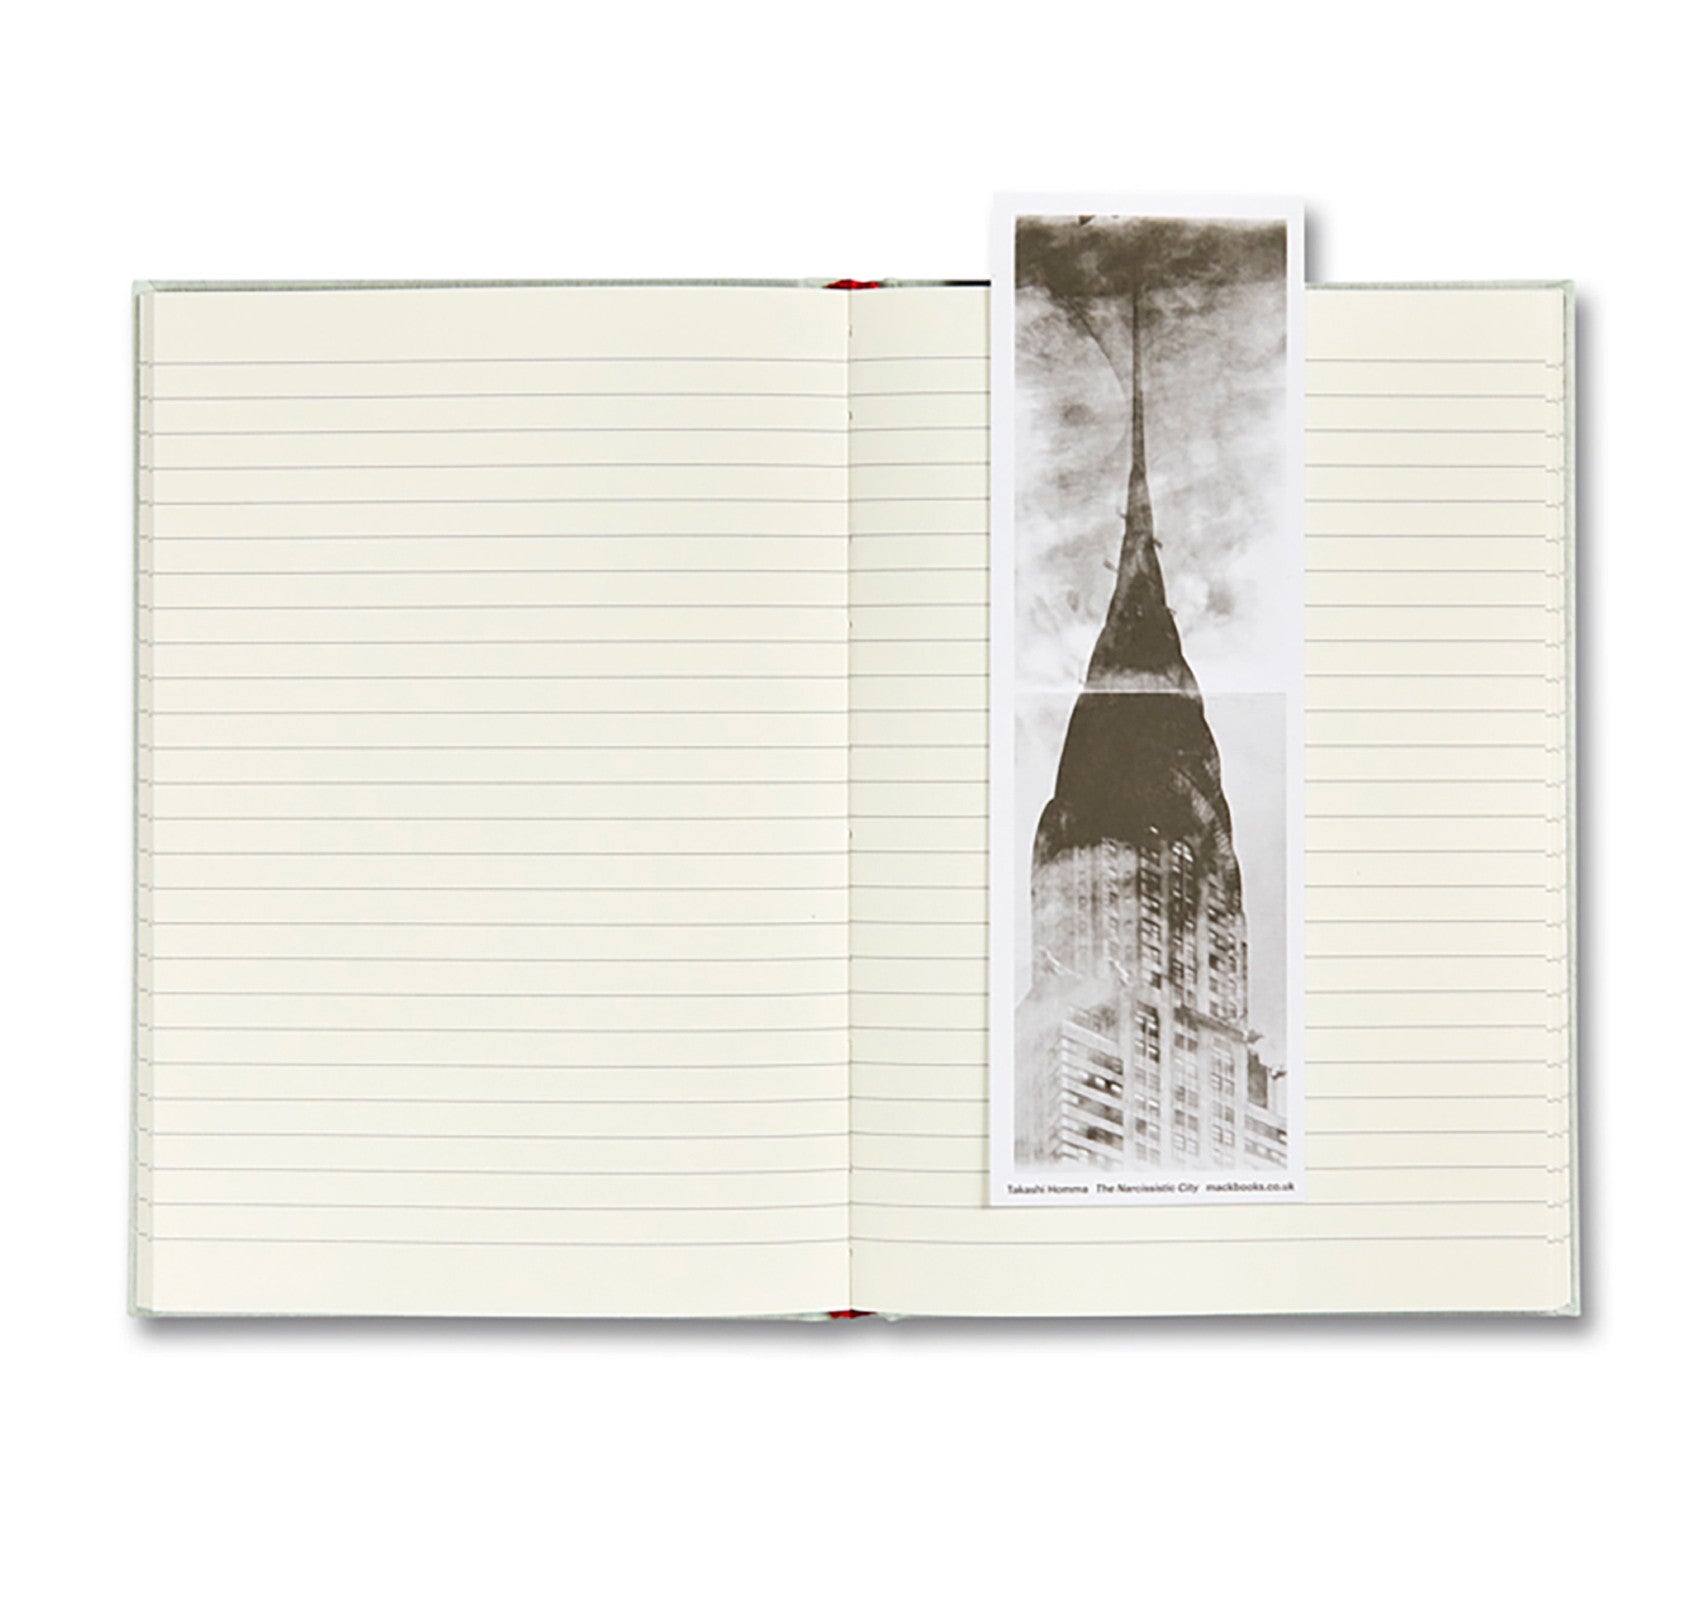 THE NARCISSISTIC CITY NOTEBOOK by Takashi Homma